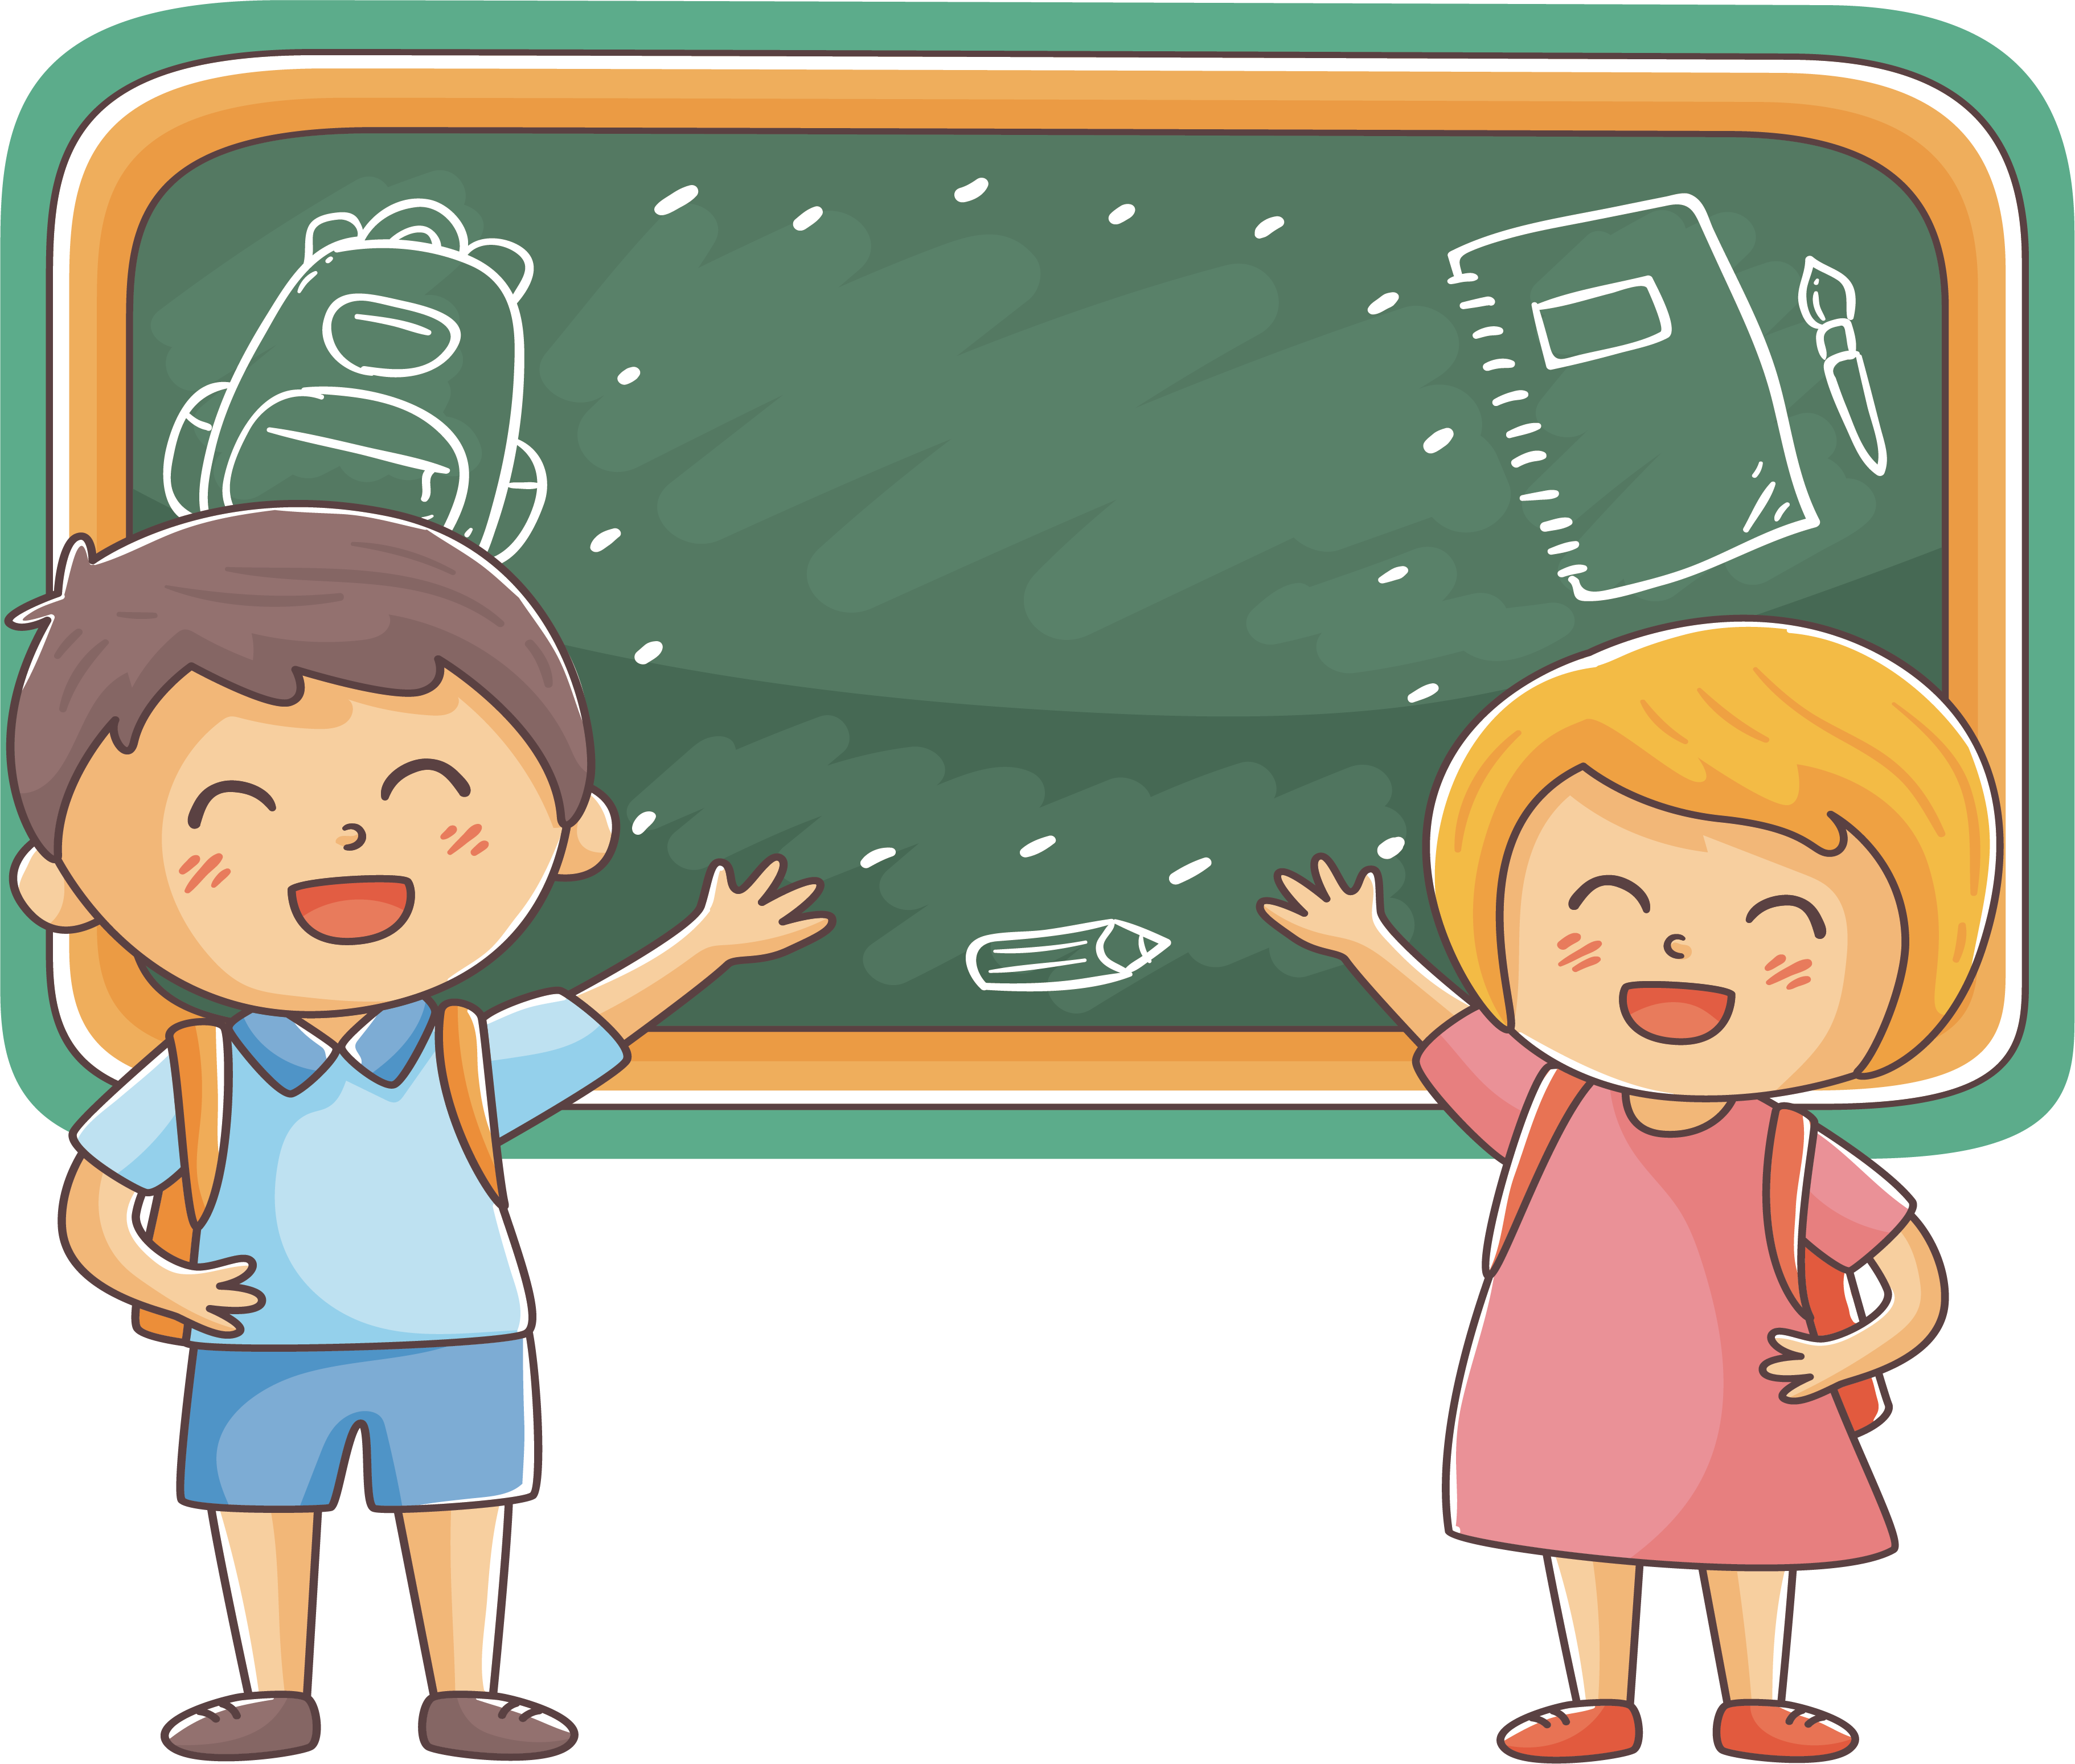 kisspng-student-school-learning-education-welcome-back-to-school-5a7ab1a10d14e2.9946037115179903050536.png